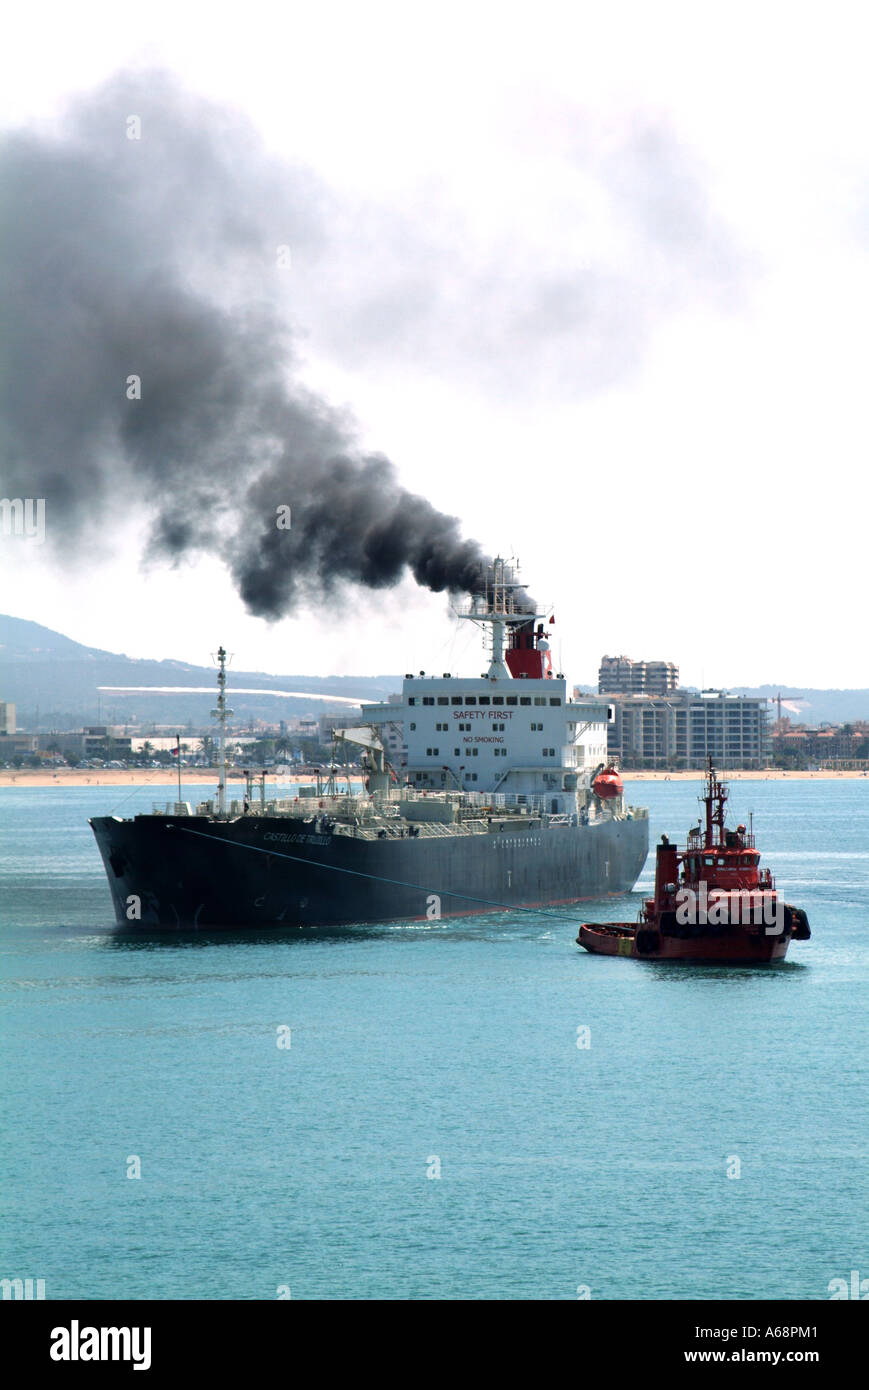 Back smoke & soot emissions belching out from funnel Cargo ship polluting local atmosphere & environment arriving at Port of Palma Mallorca Spain EU Stock Photo